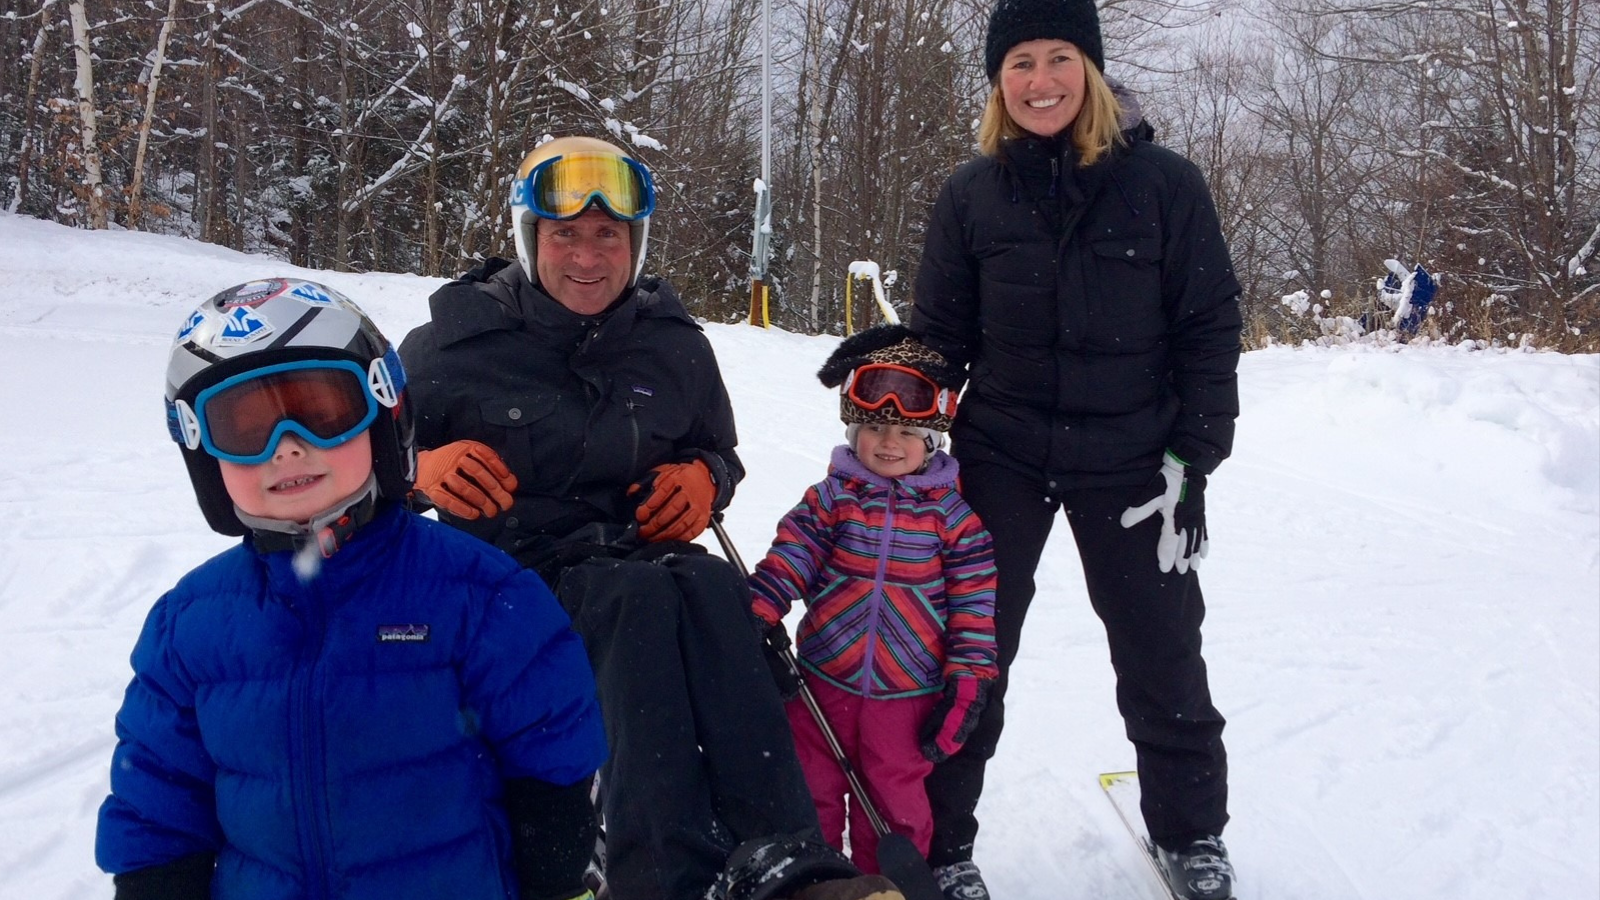 Heather Krill and Family skiing